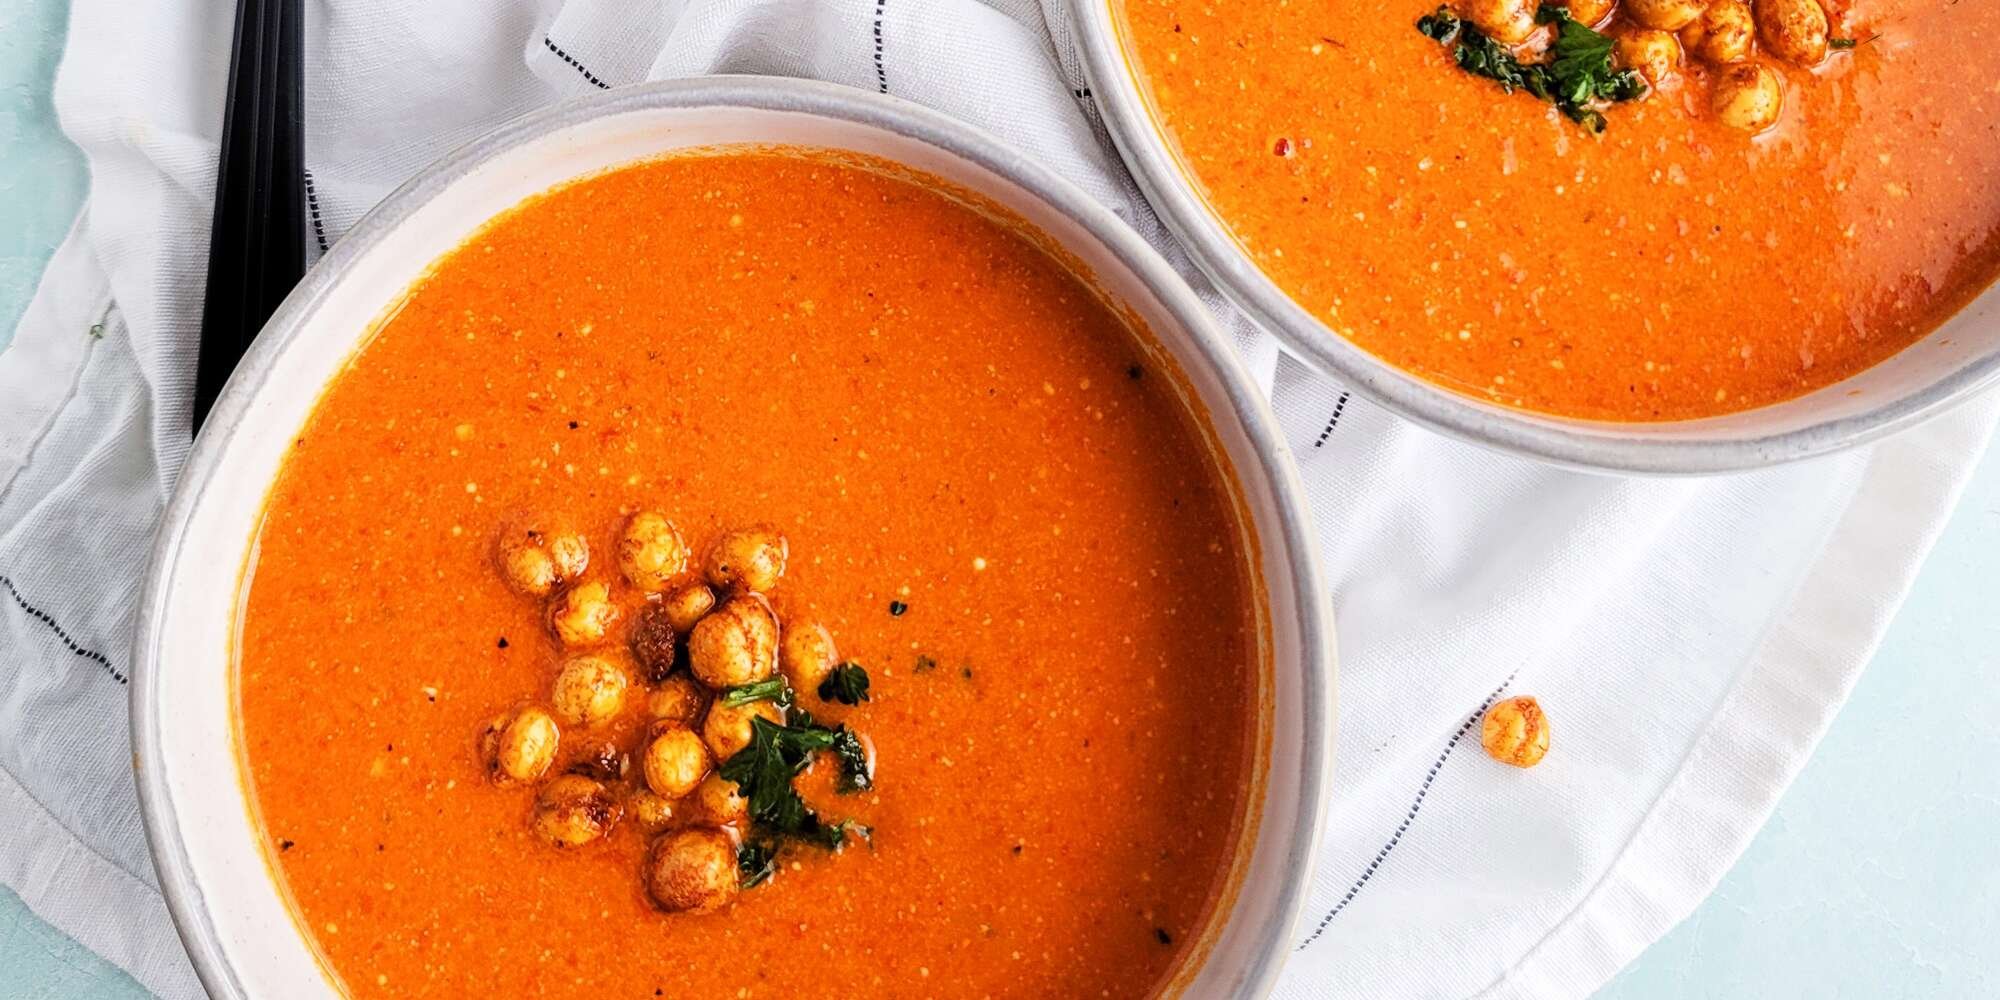 Roasted Red Pepper & Peanut Soup with Crispy Spiced Chickpeas